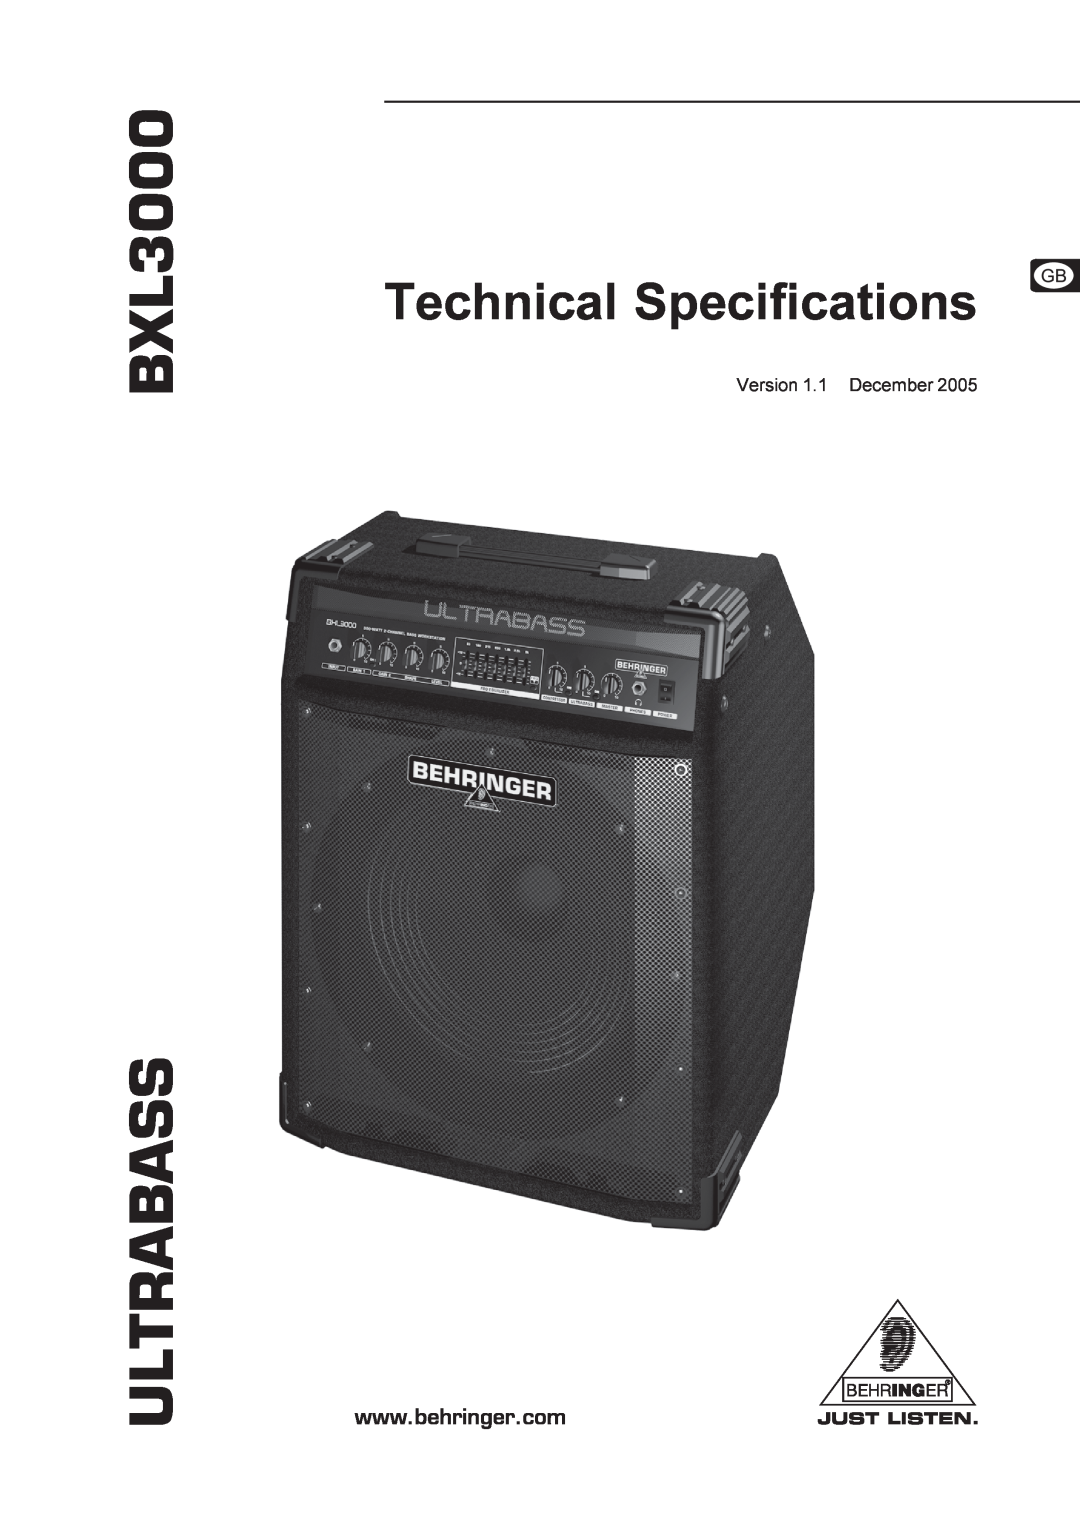 Behringer technical specifications BXL3000 ULTRABASS, Technical Specifications 